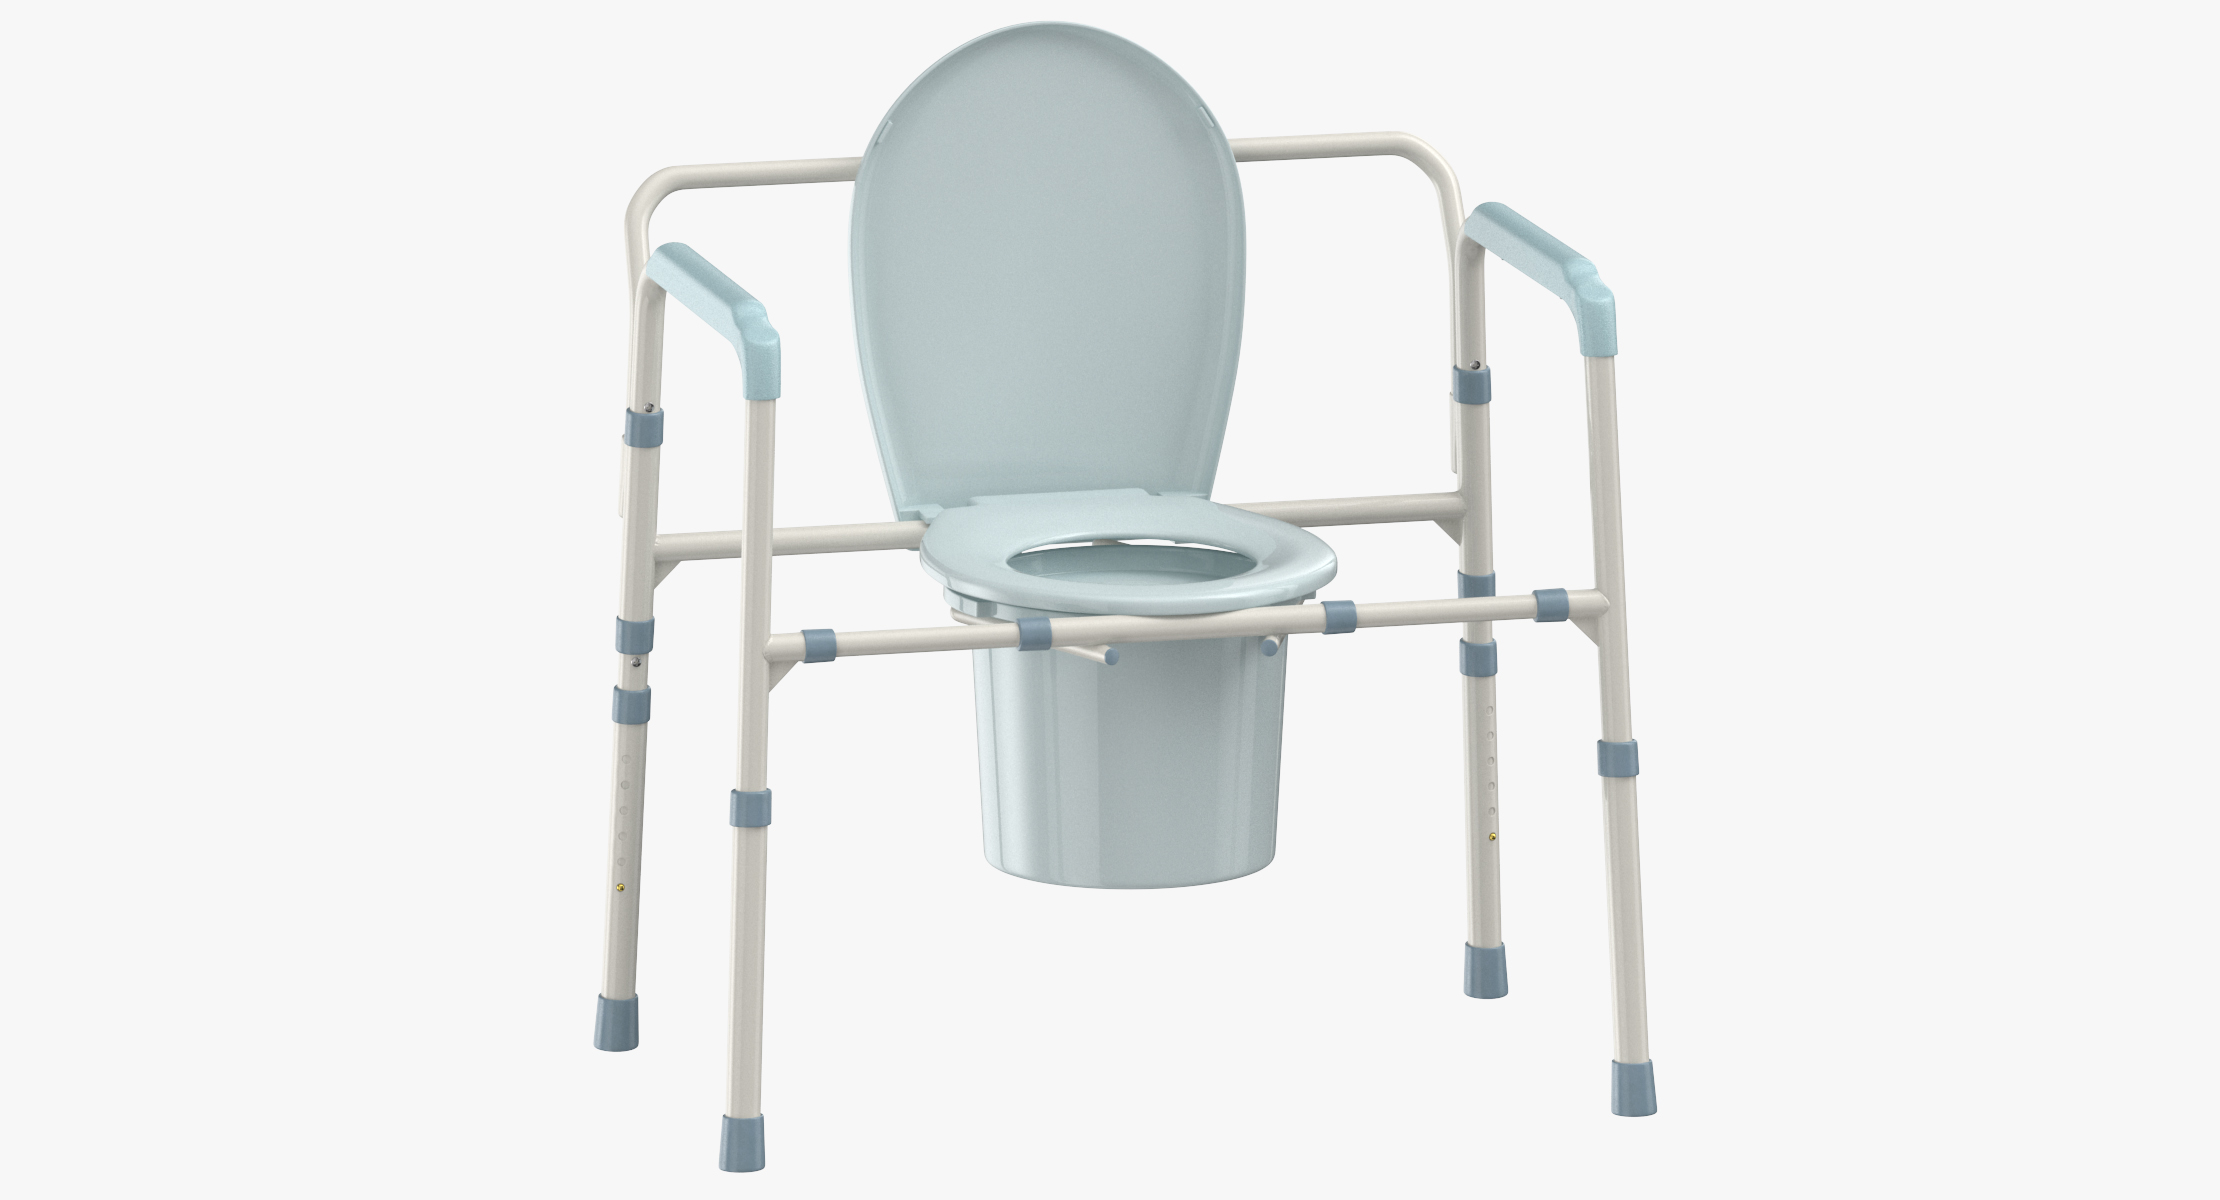 Bedside Commode Chair 3d Model Turbosquid 1321103